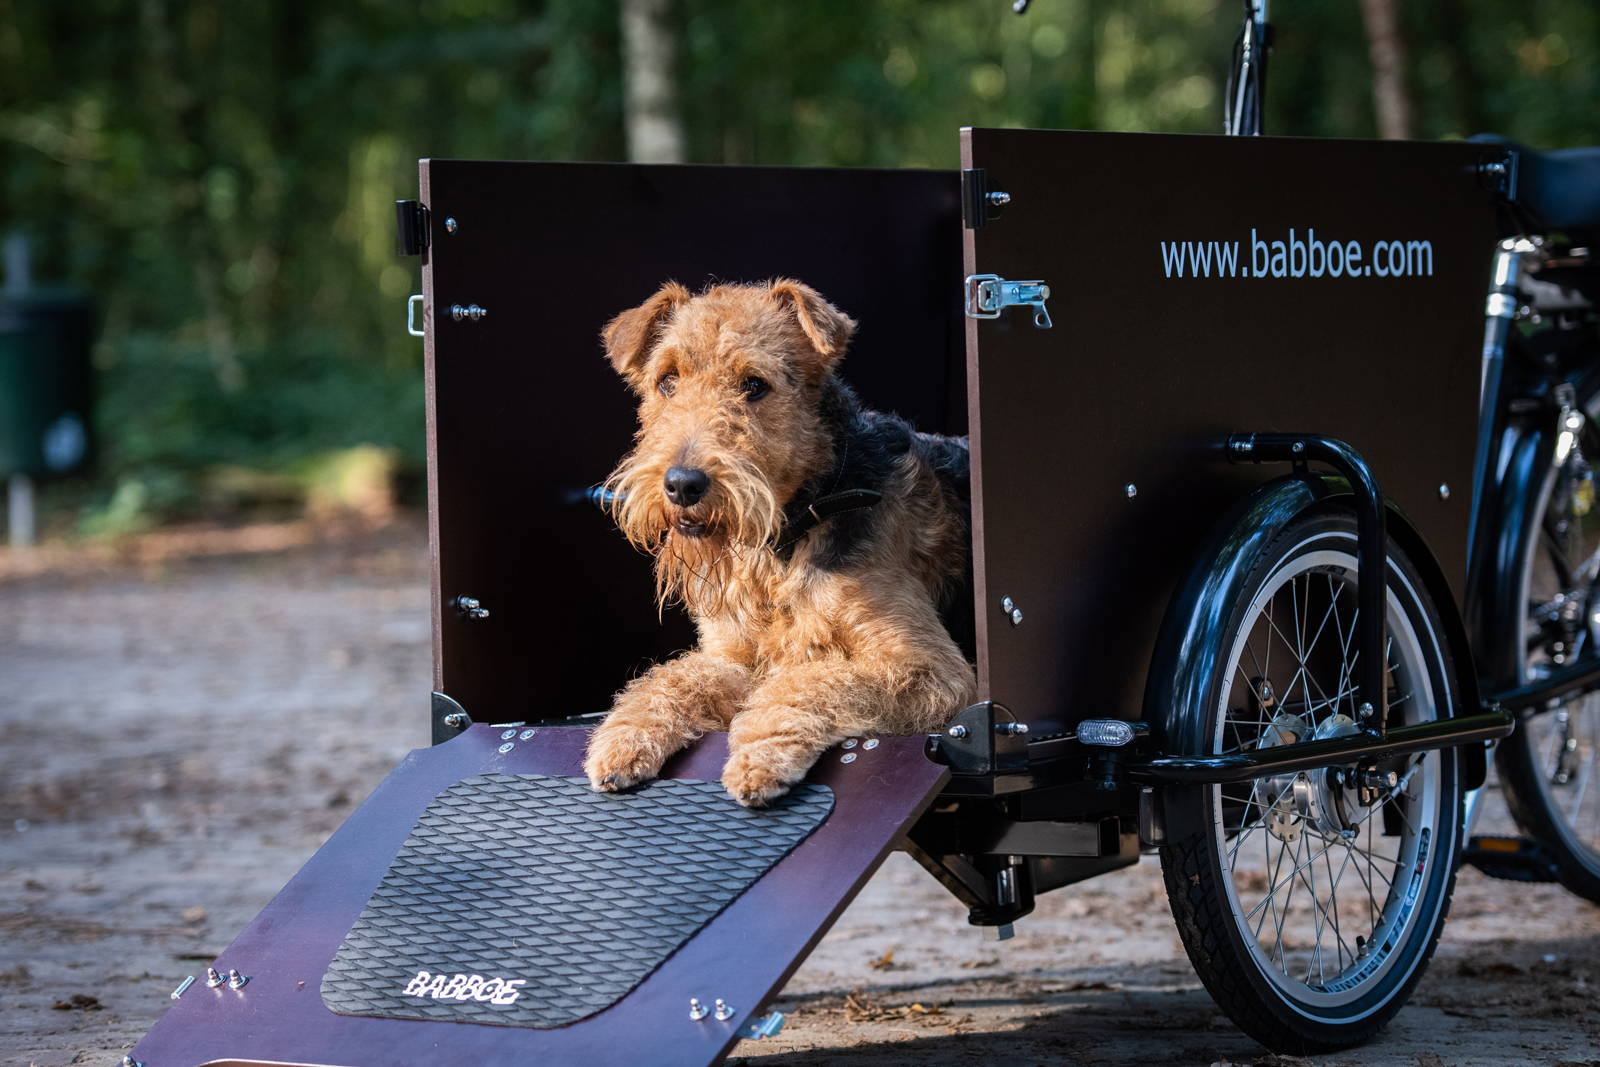 An Airedale Terrier lies down in the front of a Babboe Dog cargo bike with the ramp down.